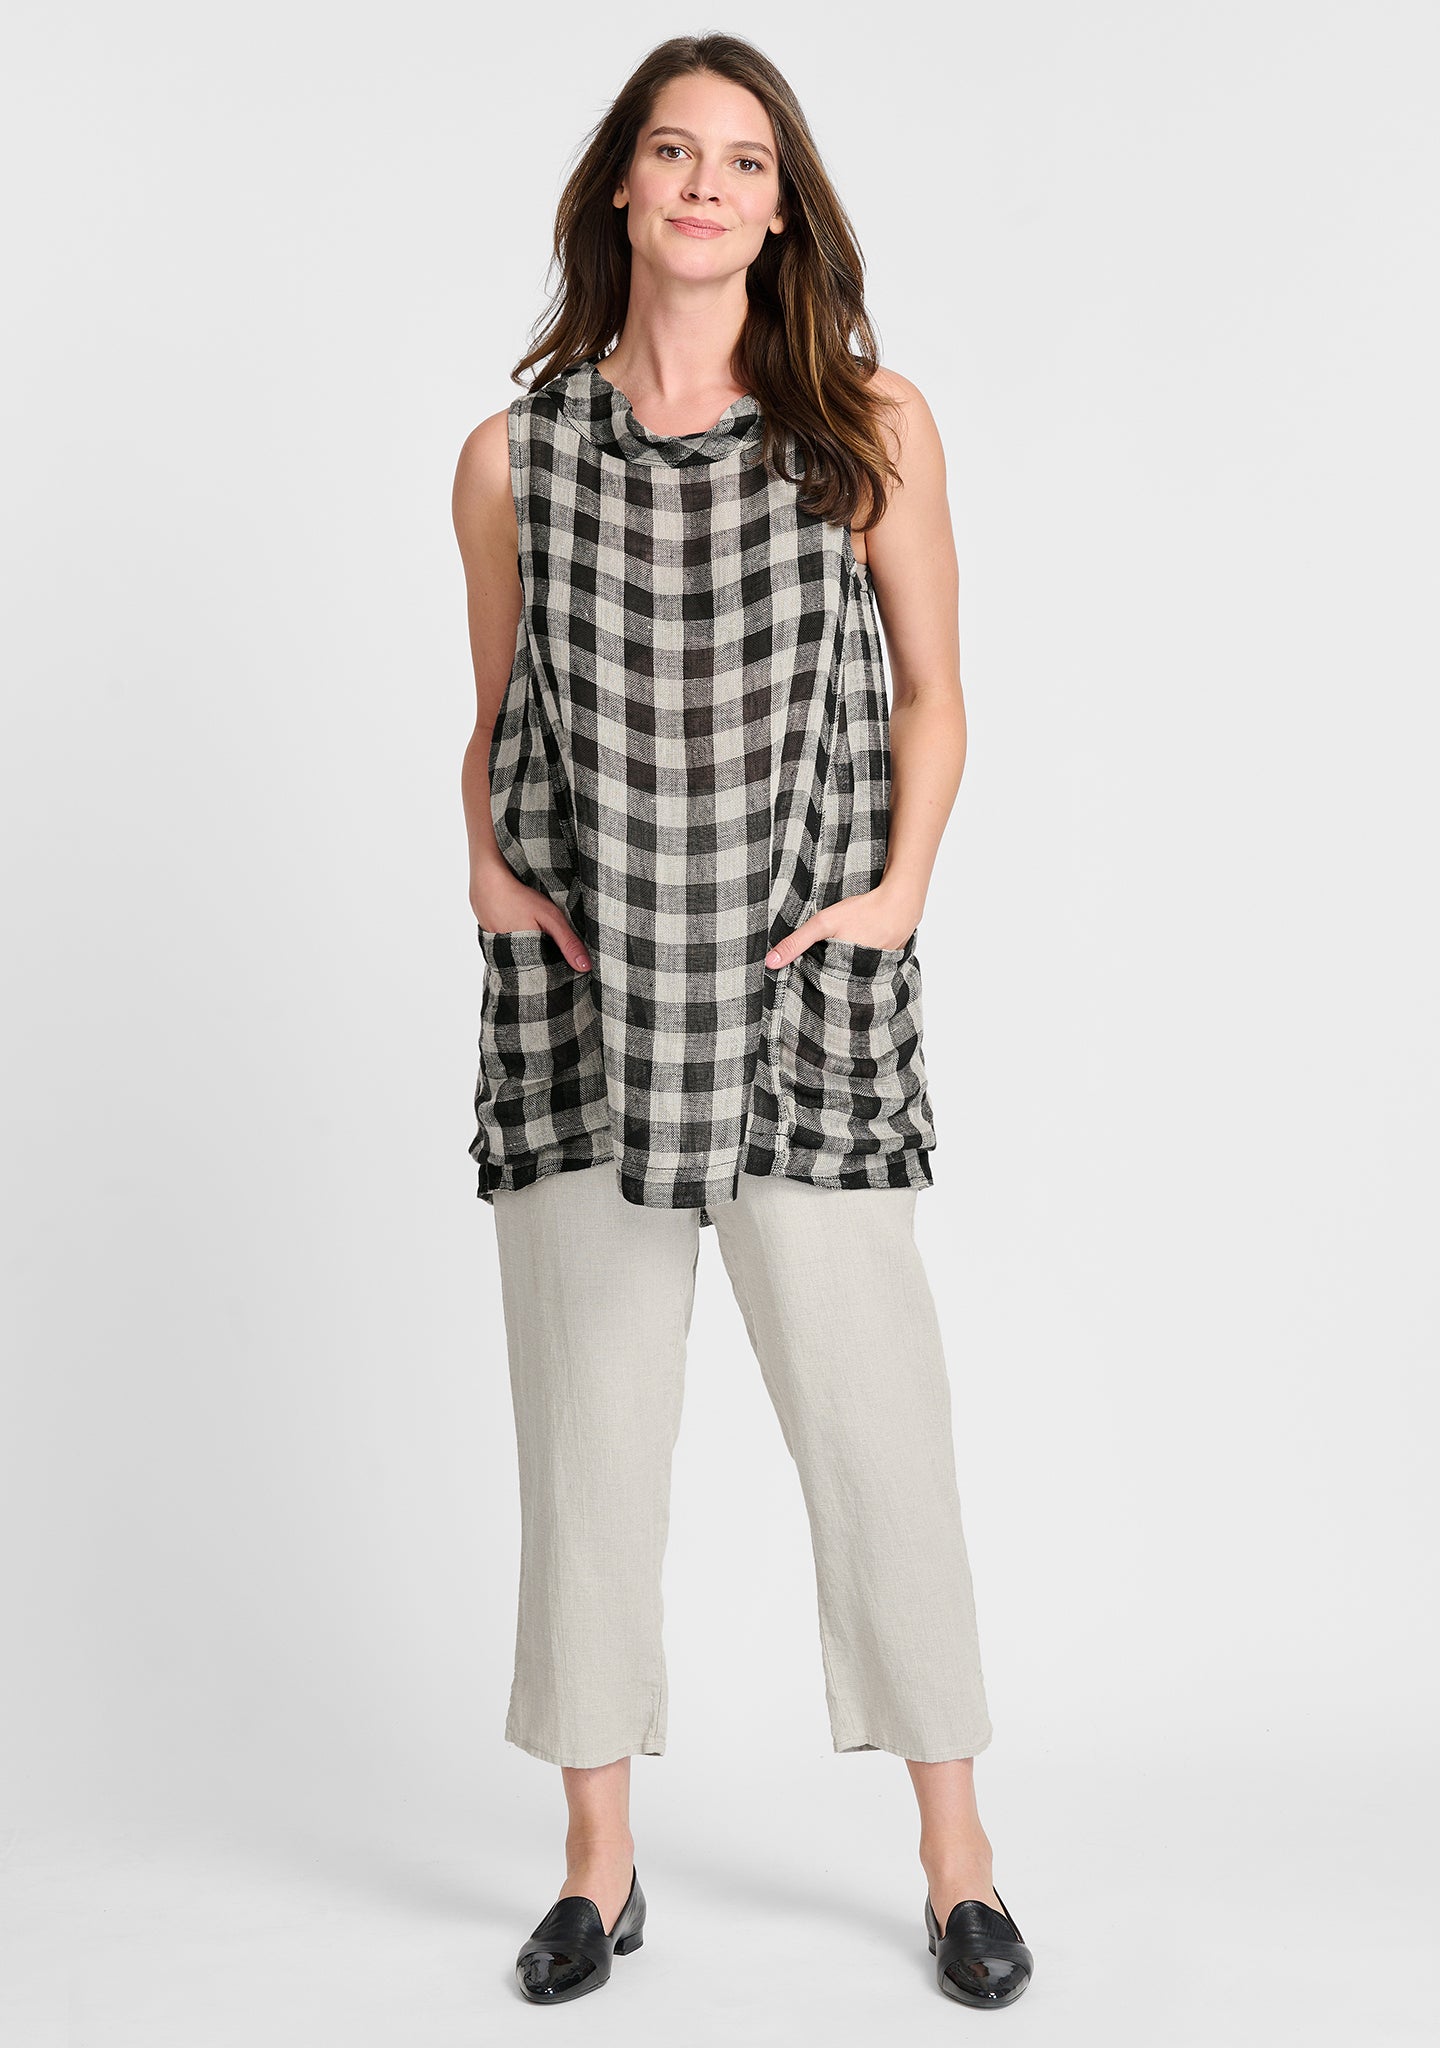 FLAX linen tank in black check with linen pants in natural